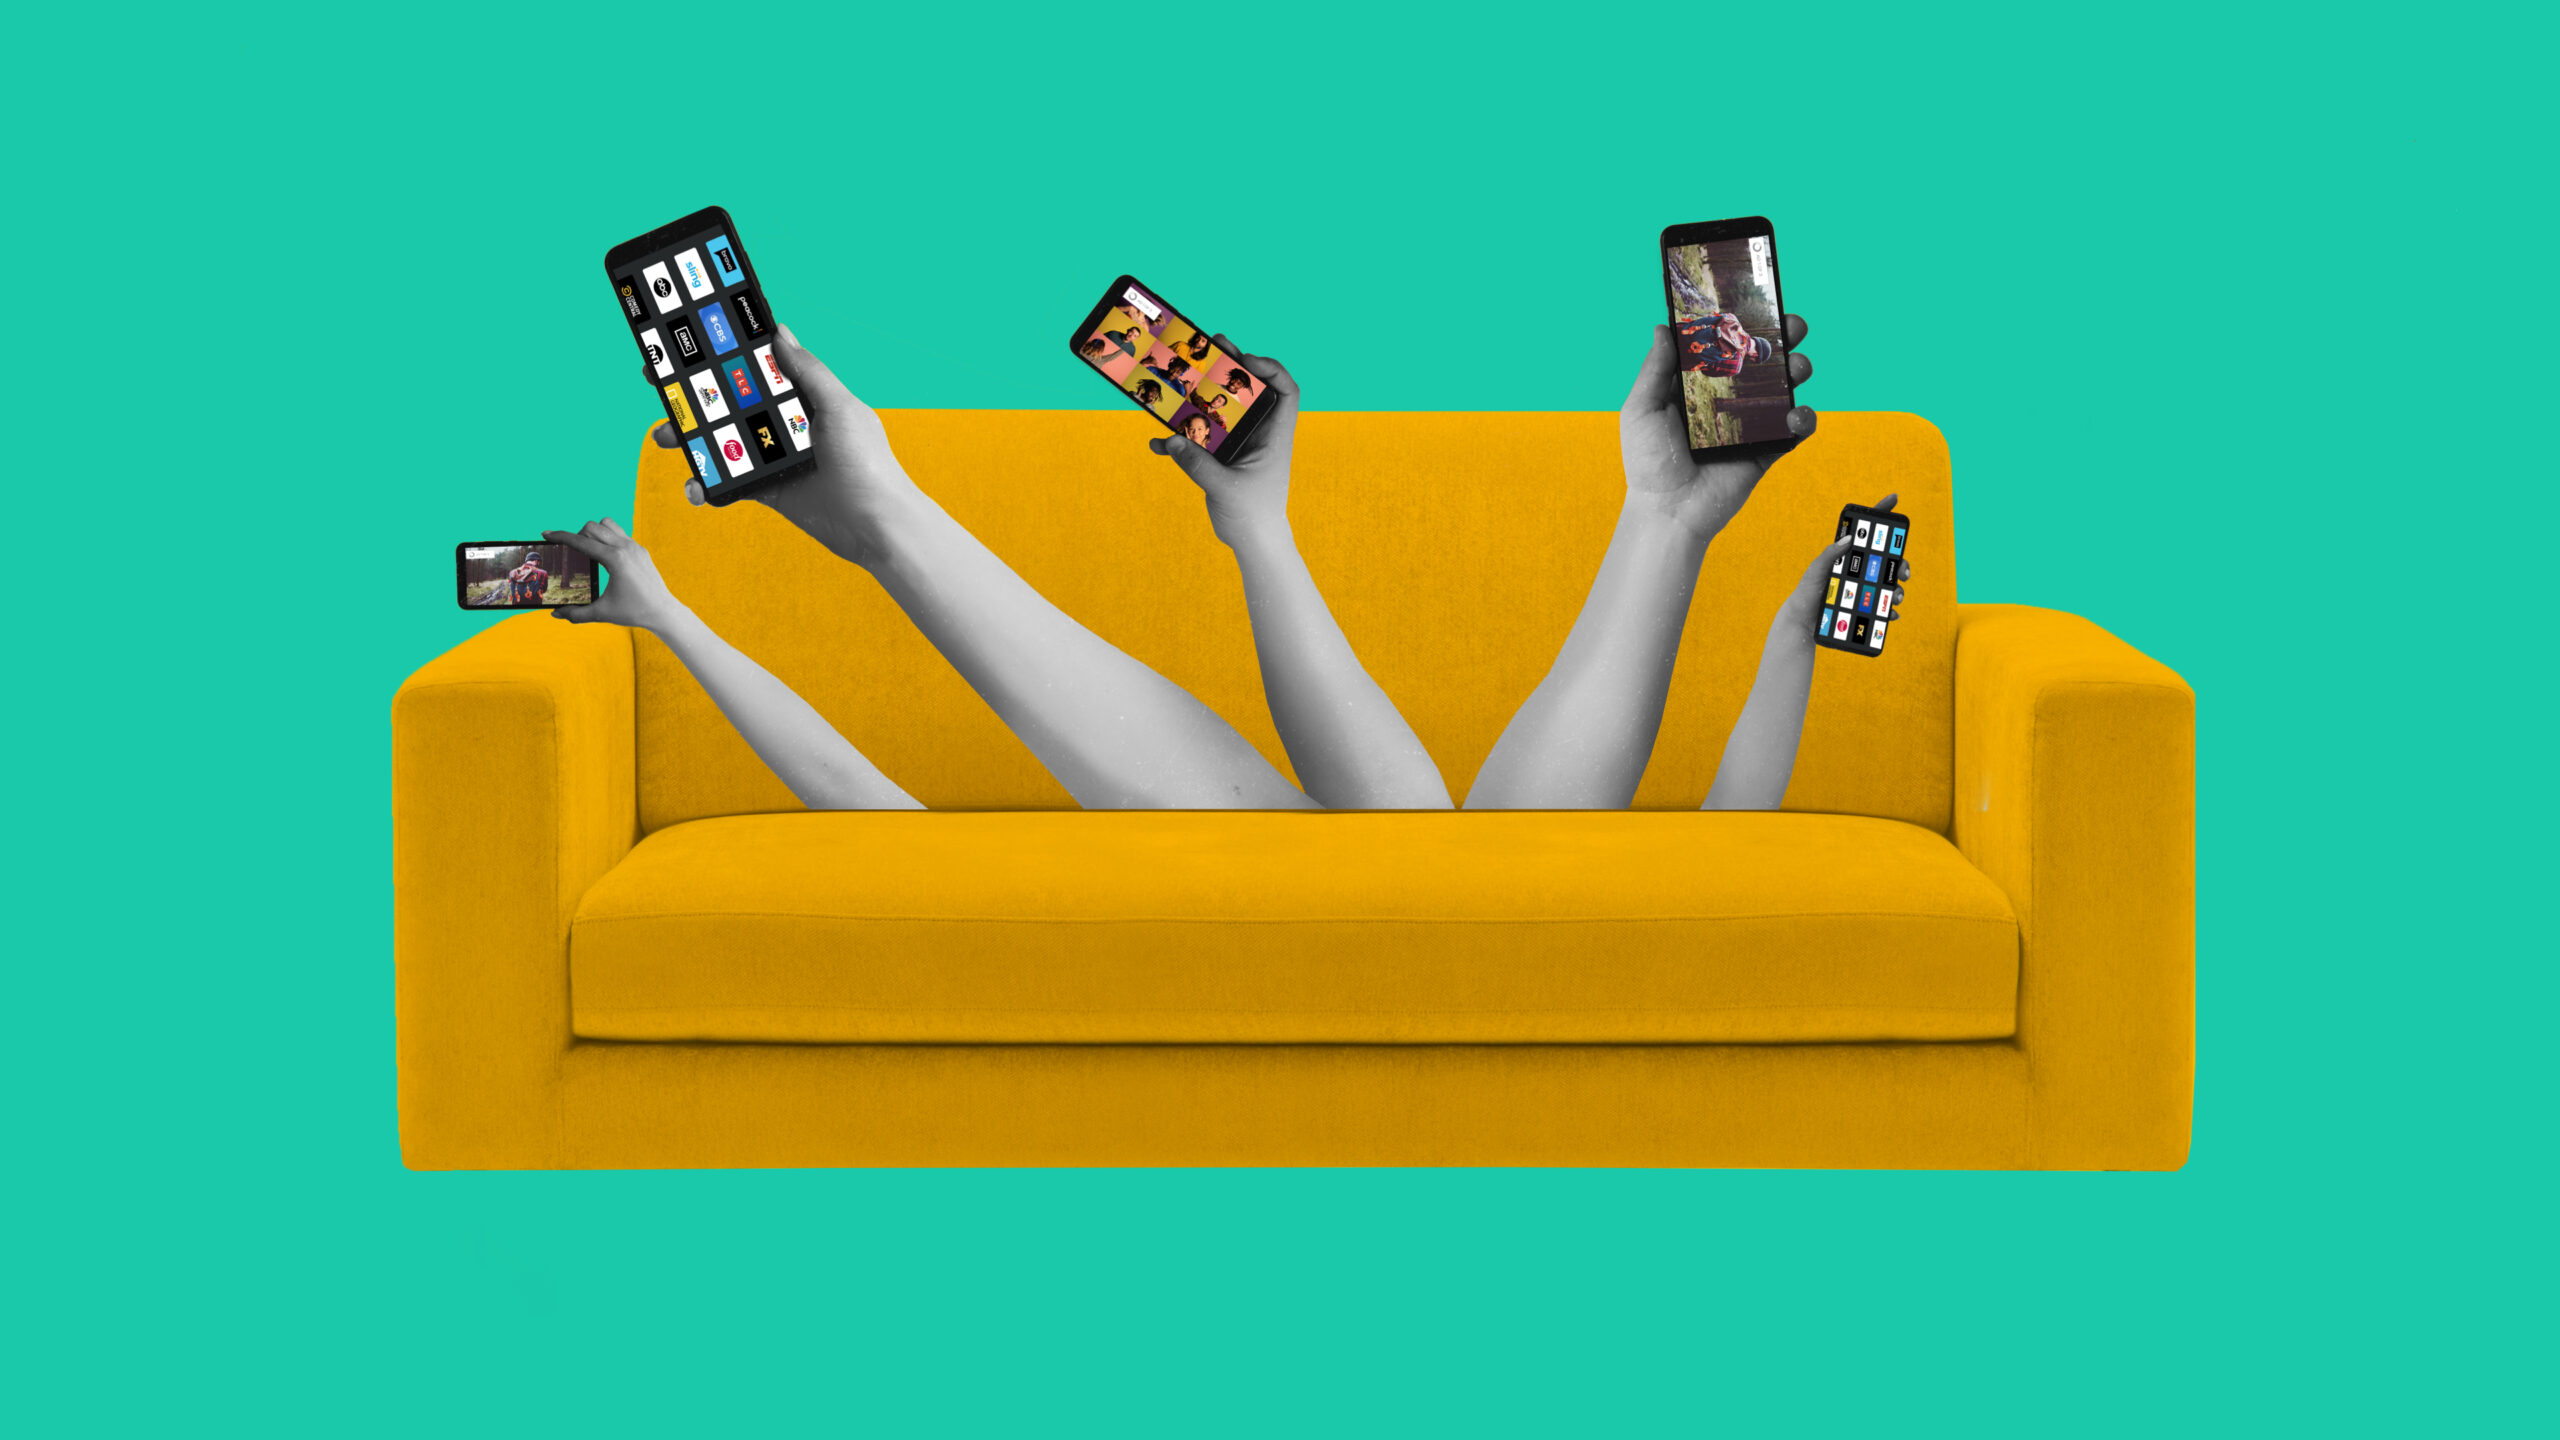 Why BYOB (Build Your Own Bundle) Is a Step Forward For Connected TV